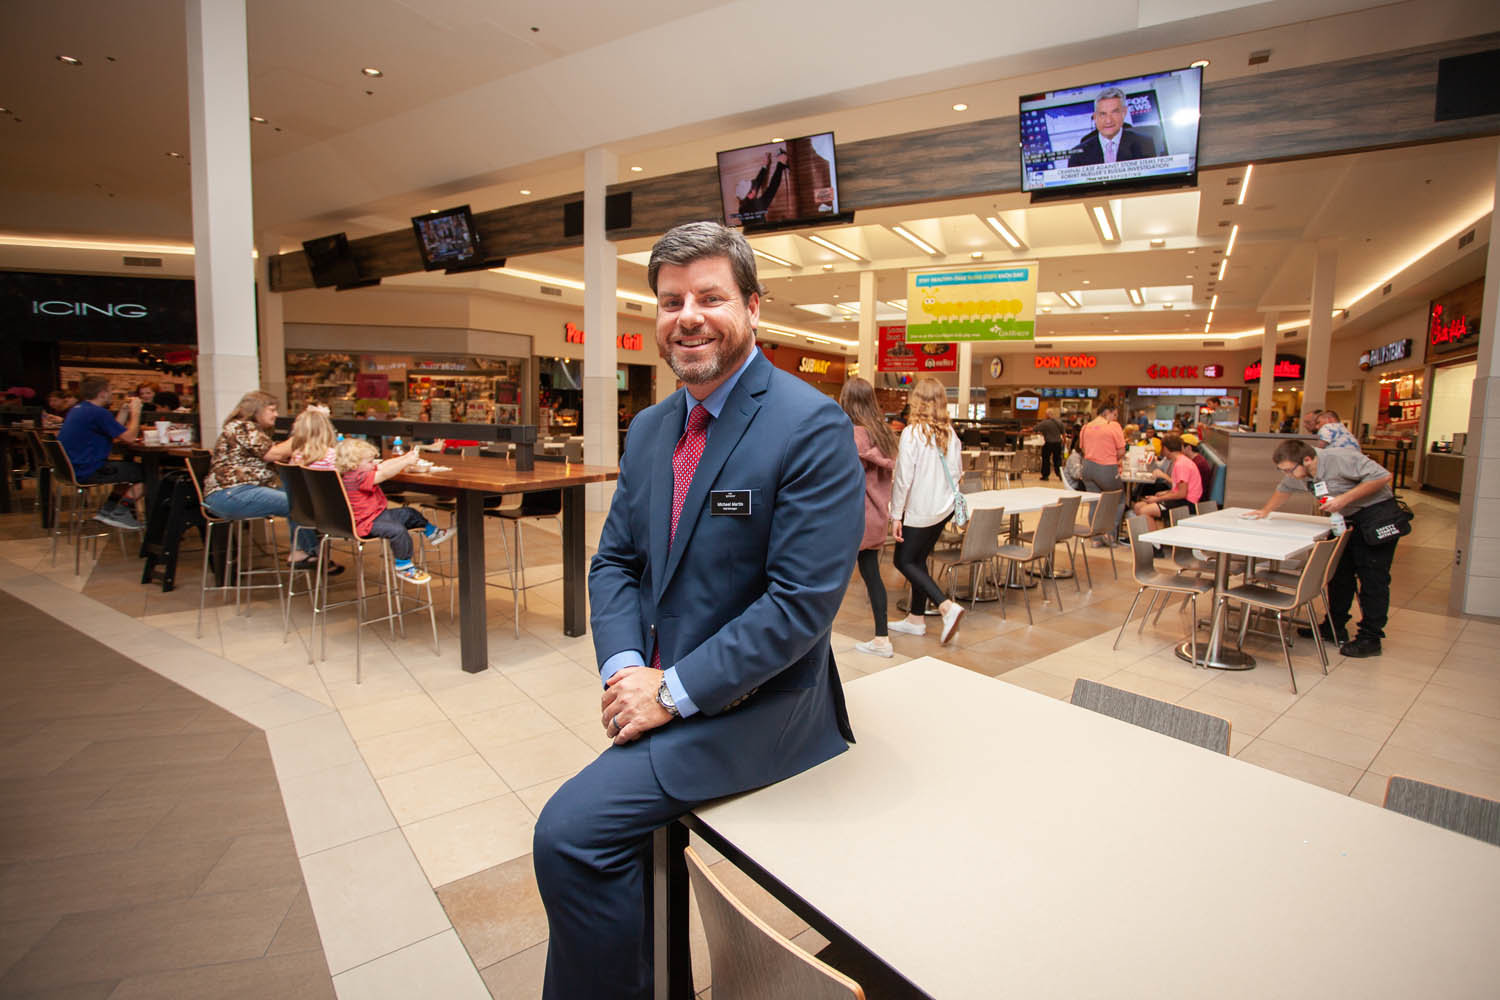 RETAIL RENOVATION: The Battlefield Mall made improvements to its dining pavilion this year, which included the addition of TVs, charging stations and modern furniture, says General Manager Michael Martin.